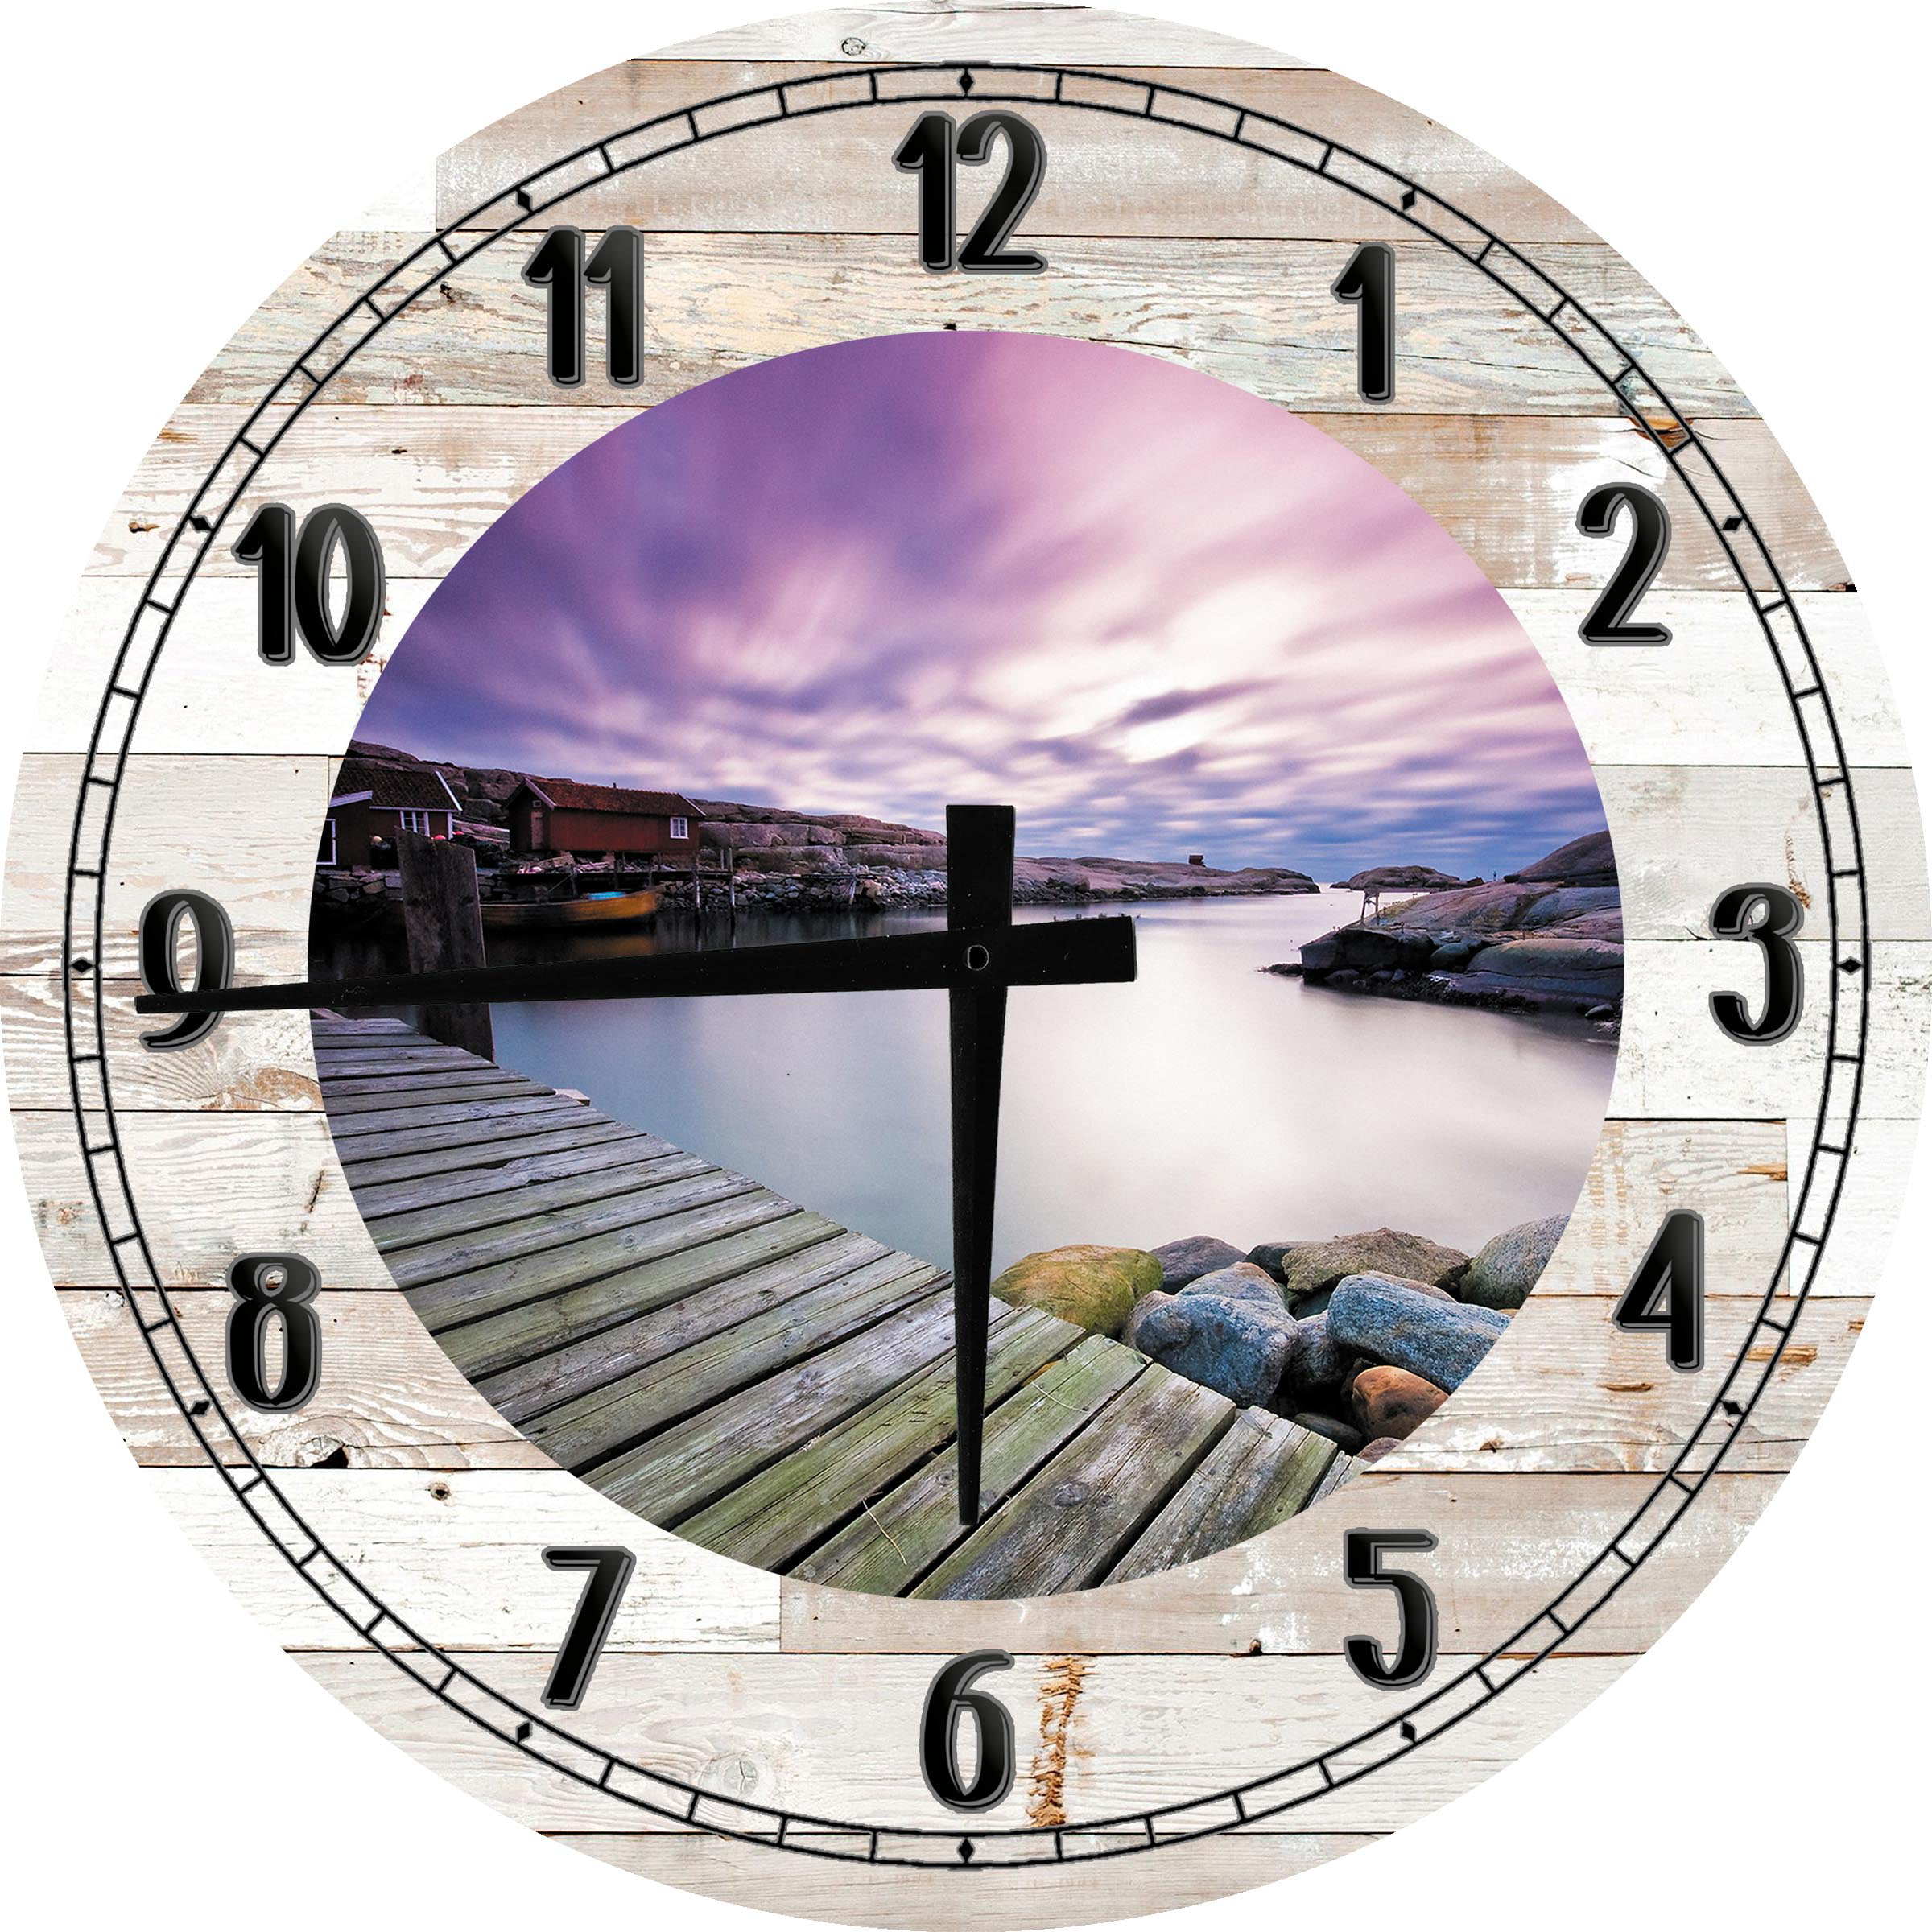 Whatever Lake Time Color Wood Round Vintage Wall Clock Silent Non-Ticking Clocks 10 Inch Battery Operated Wall Clocks Art Gift Home Kitchen Bedrooms Bathroom 